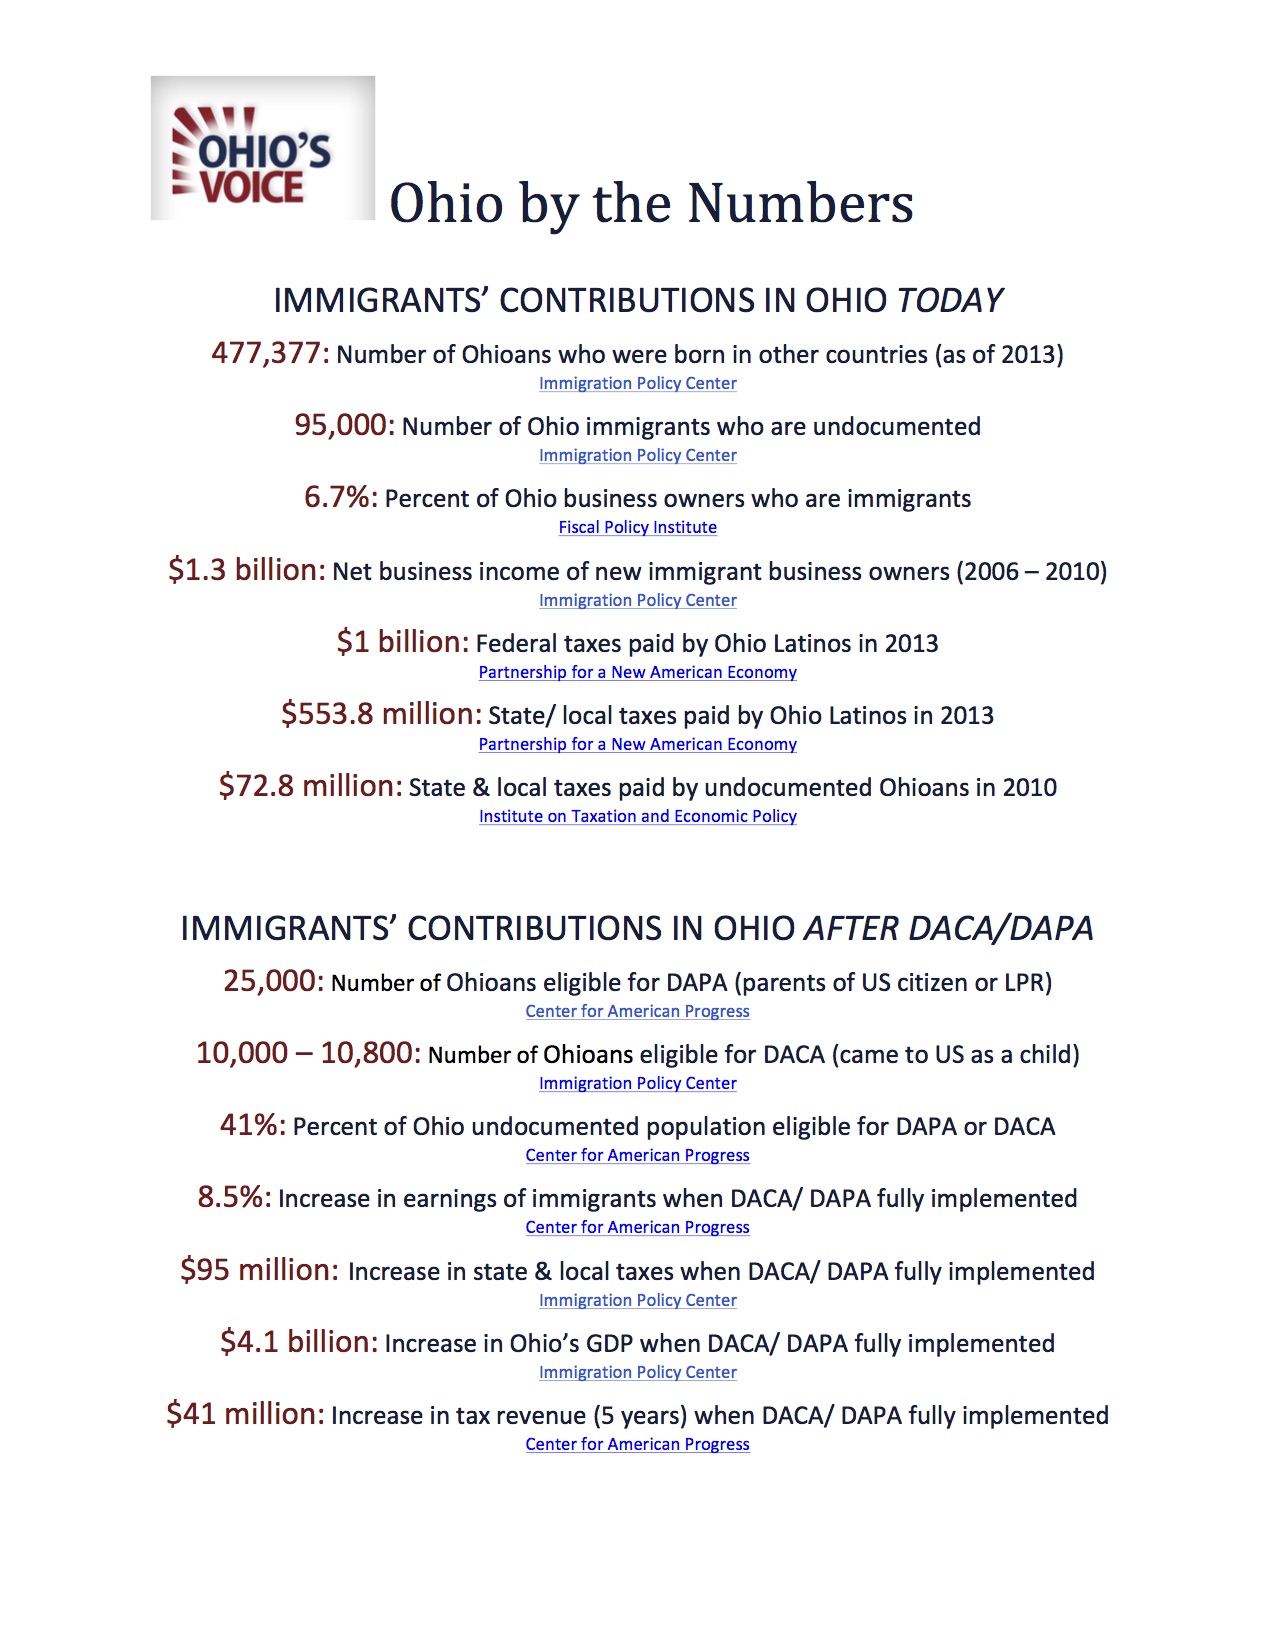 Ohio_Numbers_July 2015 Final copy